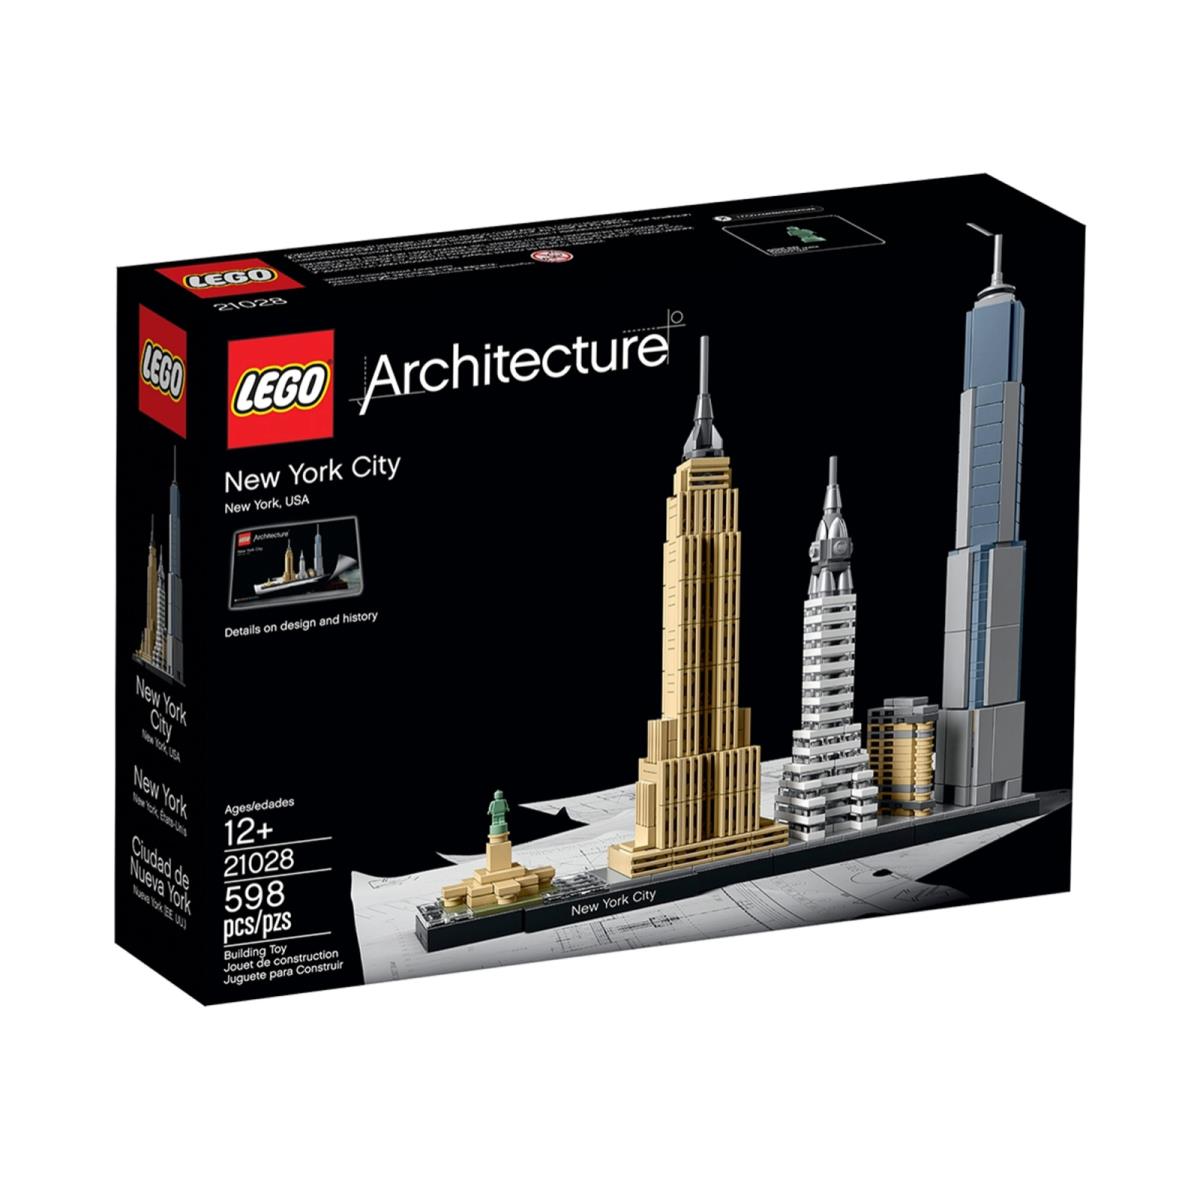 Lego Architecture 21028 York City Gift-free Immediate Shipping